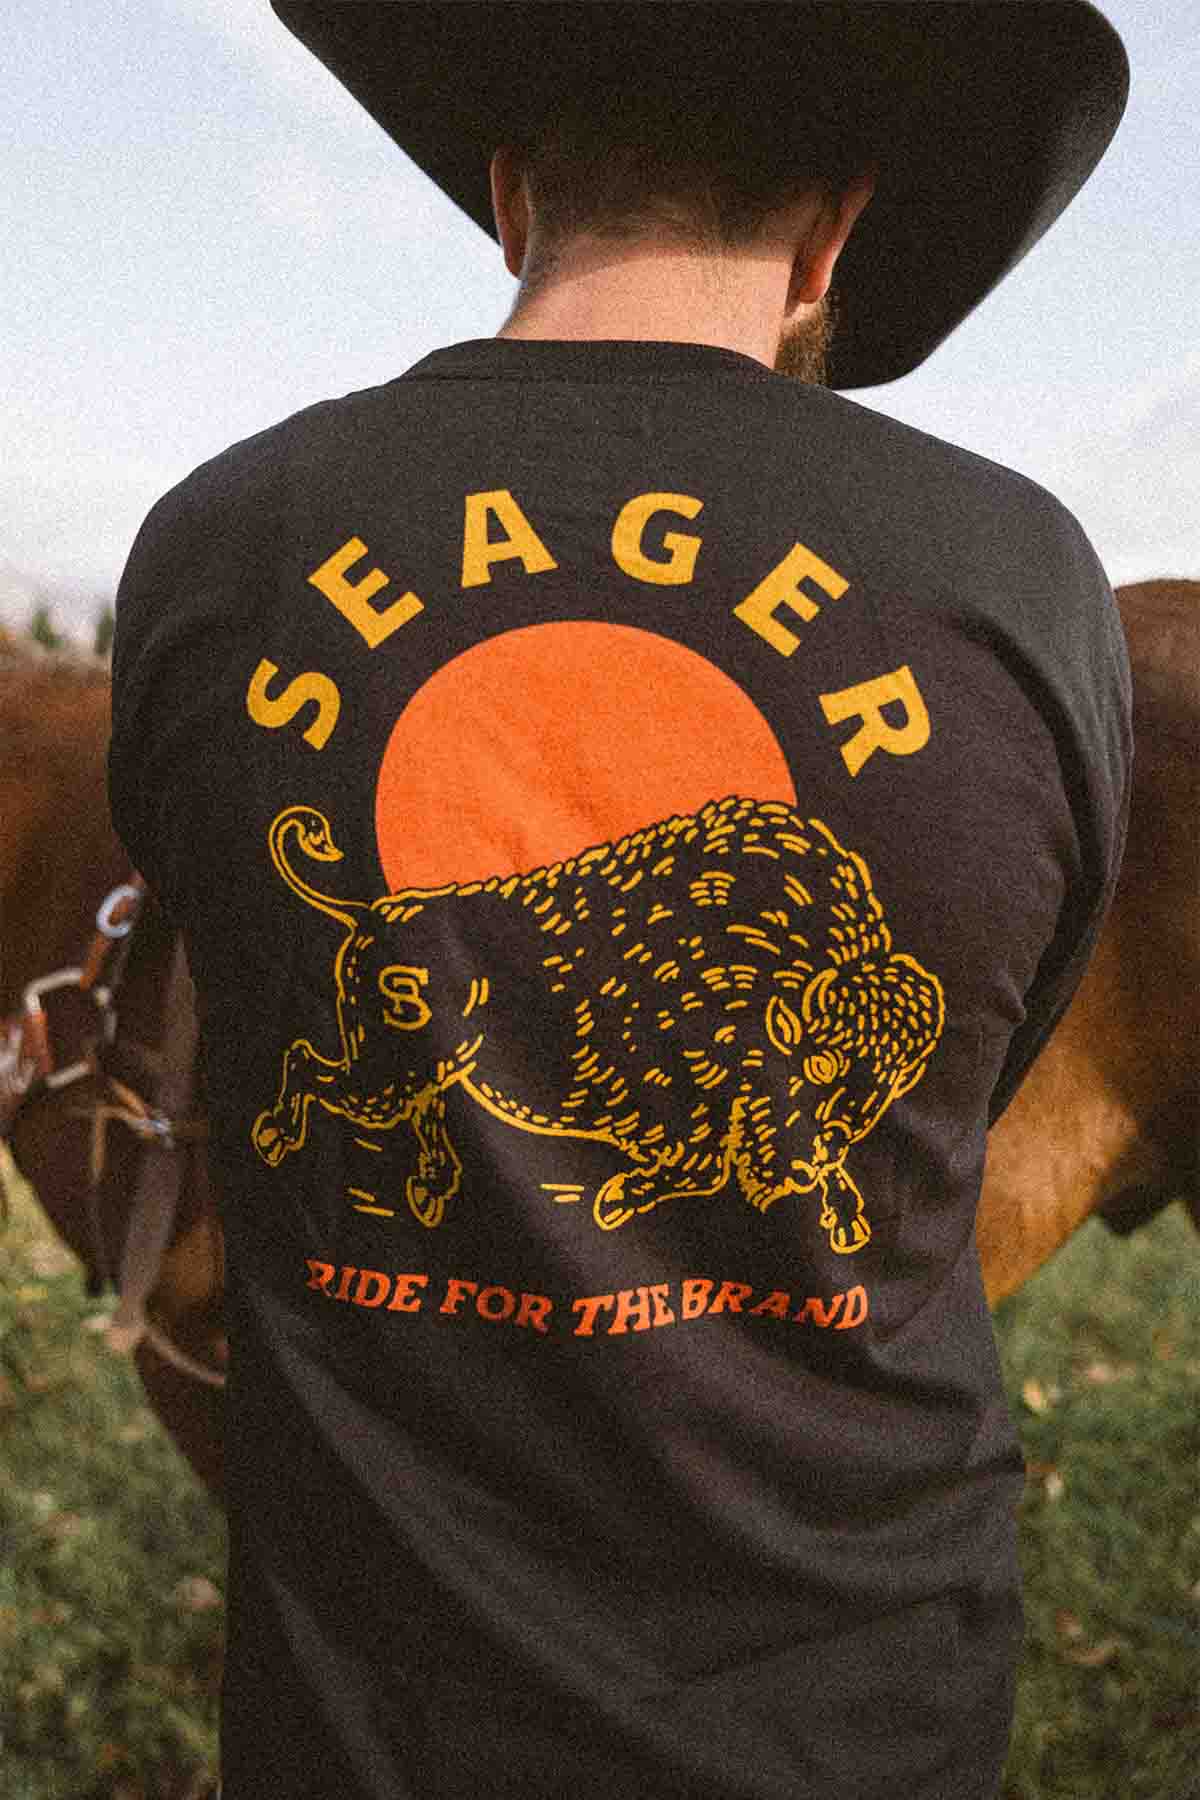 Seager - Ride for the Brand LS Tee - Black - Model